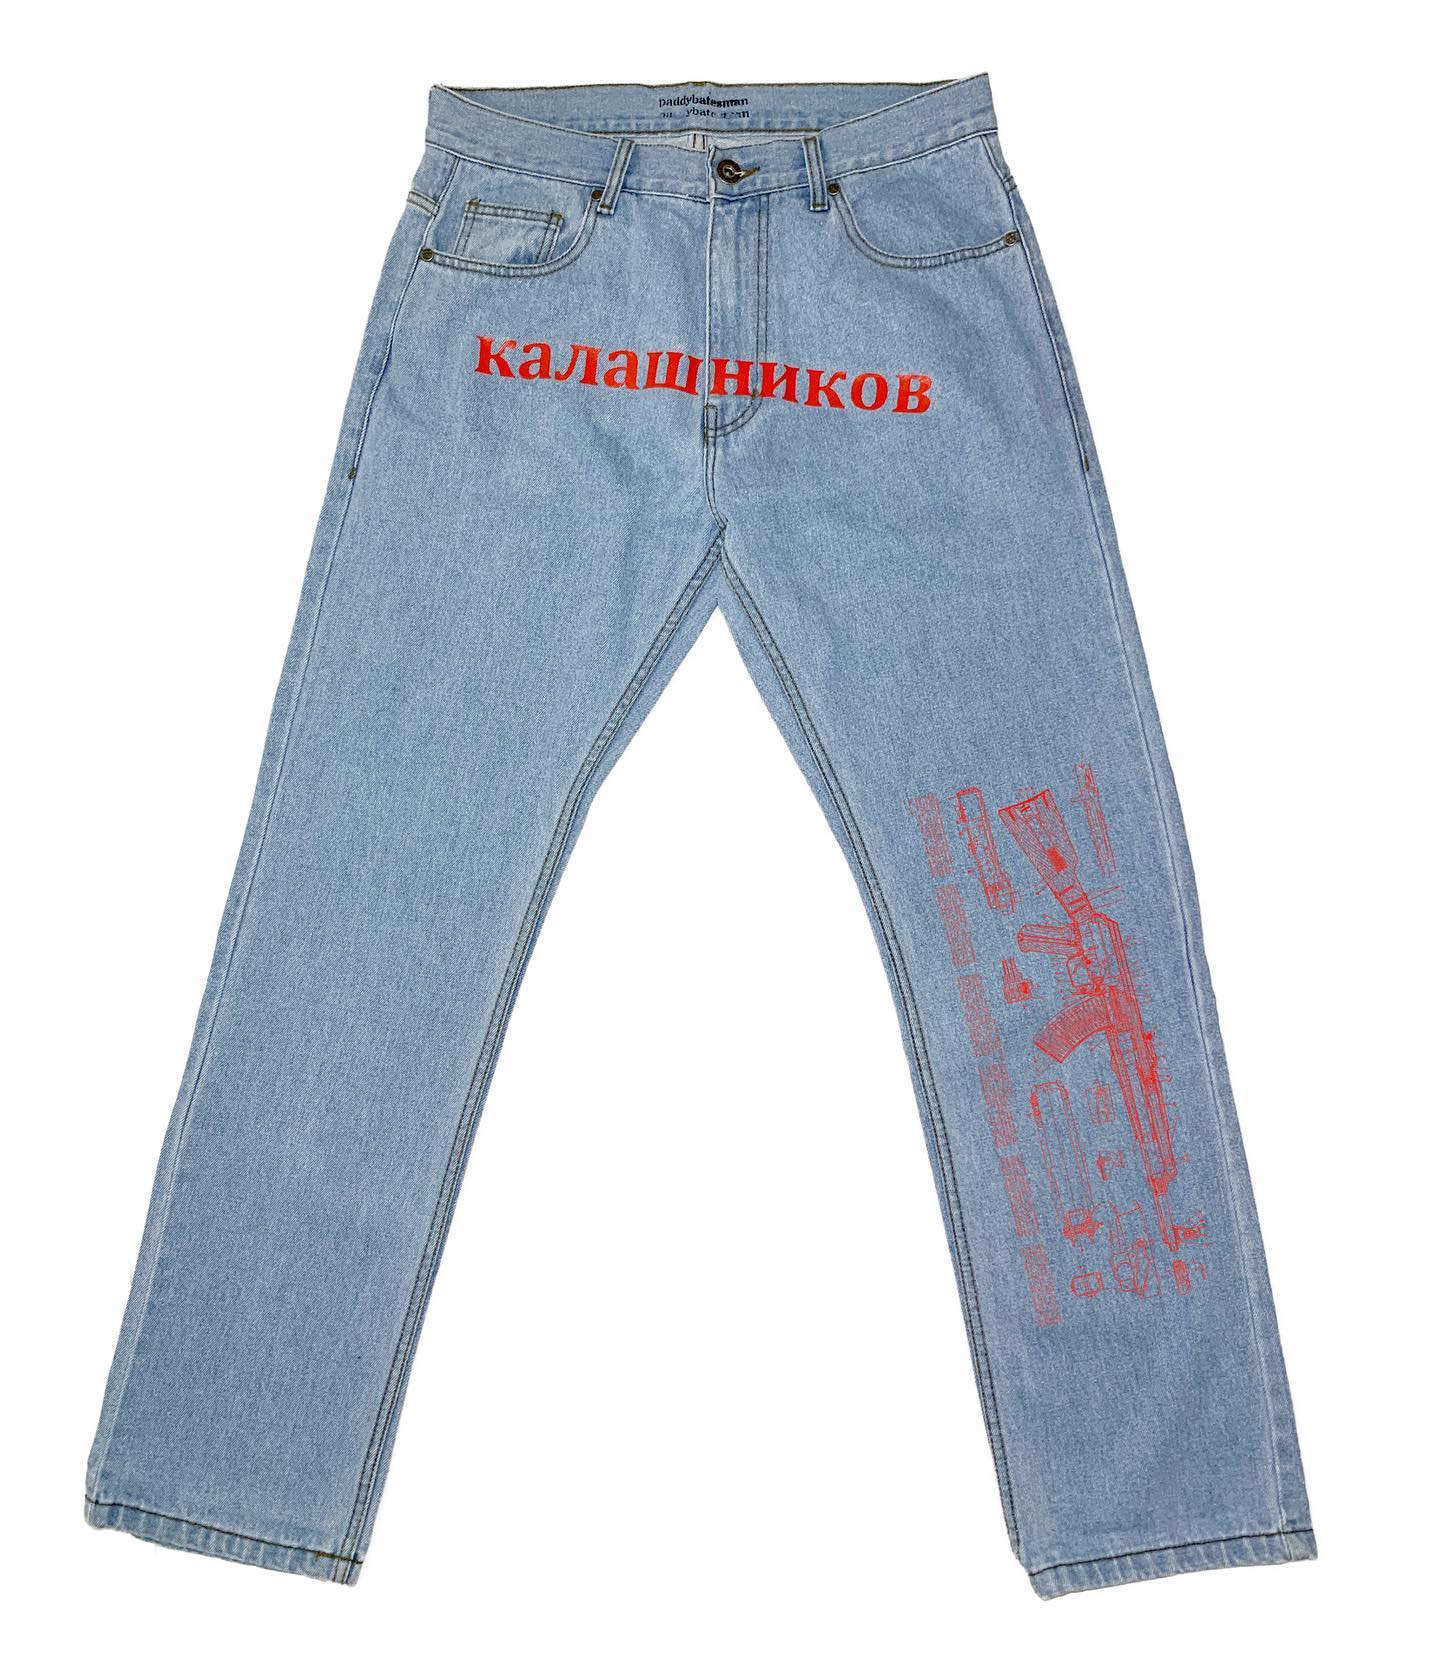 Personalized fashion printed jeans